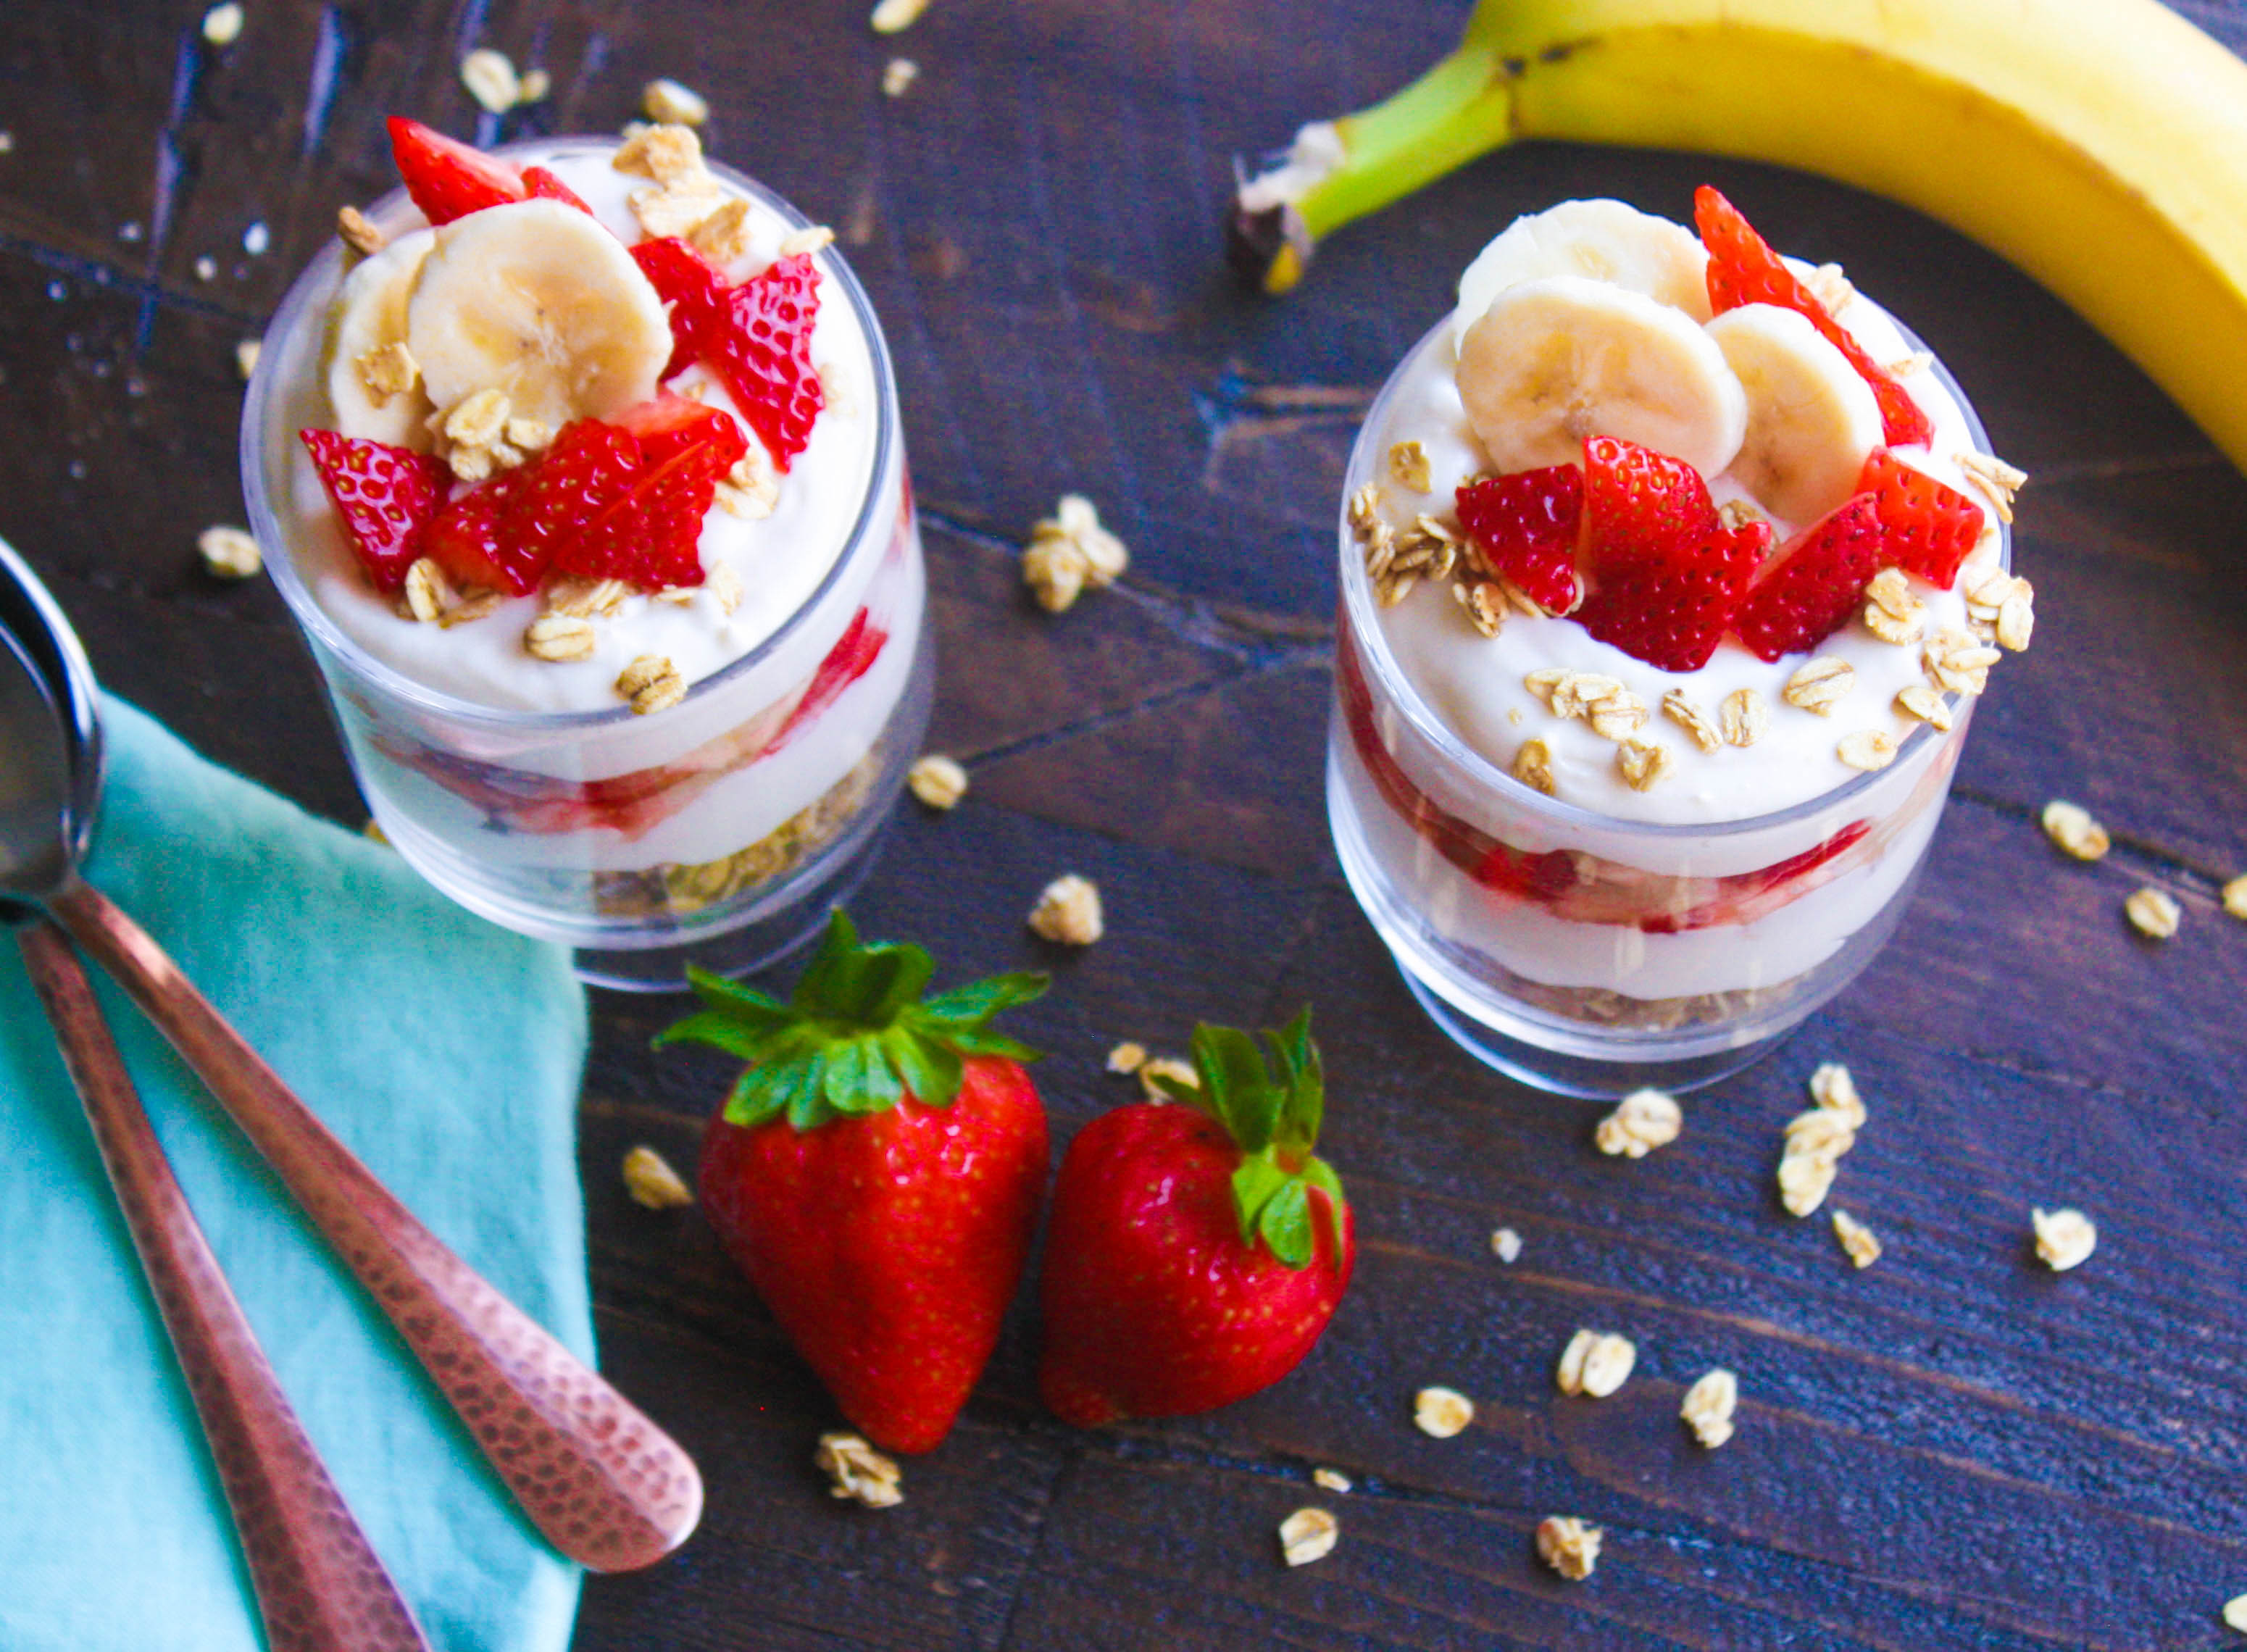  No Bake Strawberry-Banana Cheesecake Parfaits are the perfect treat when it's hot out. No Bake Strawberry-Banana Cheesecake Parfaits are no fuss, all delicious! 